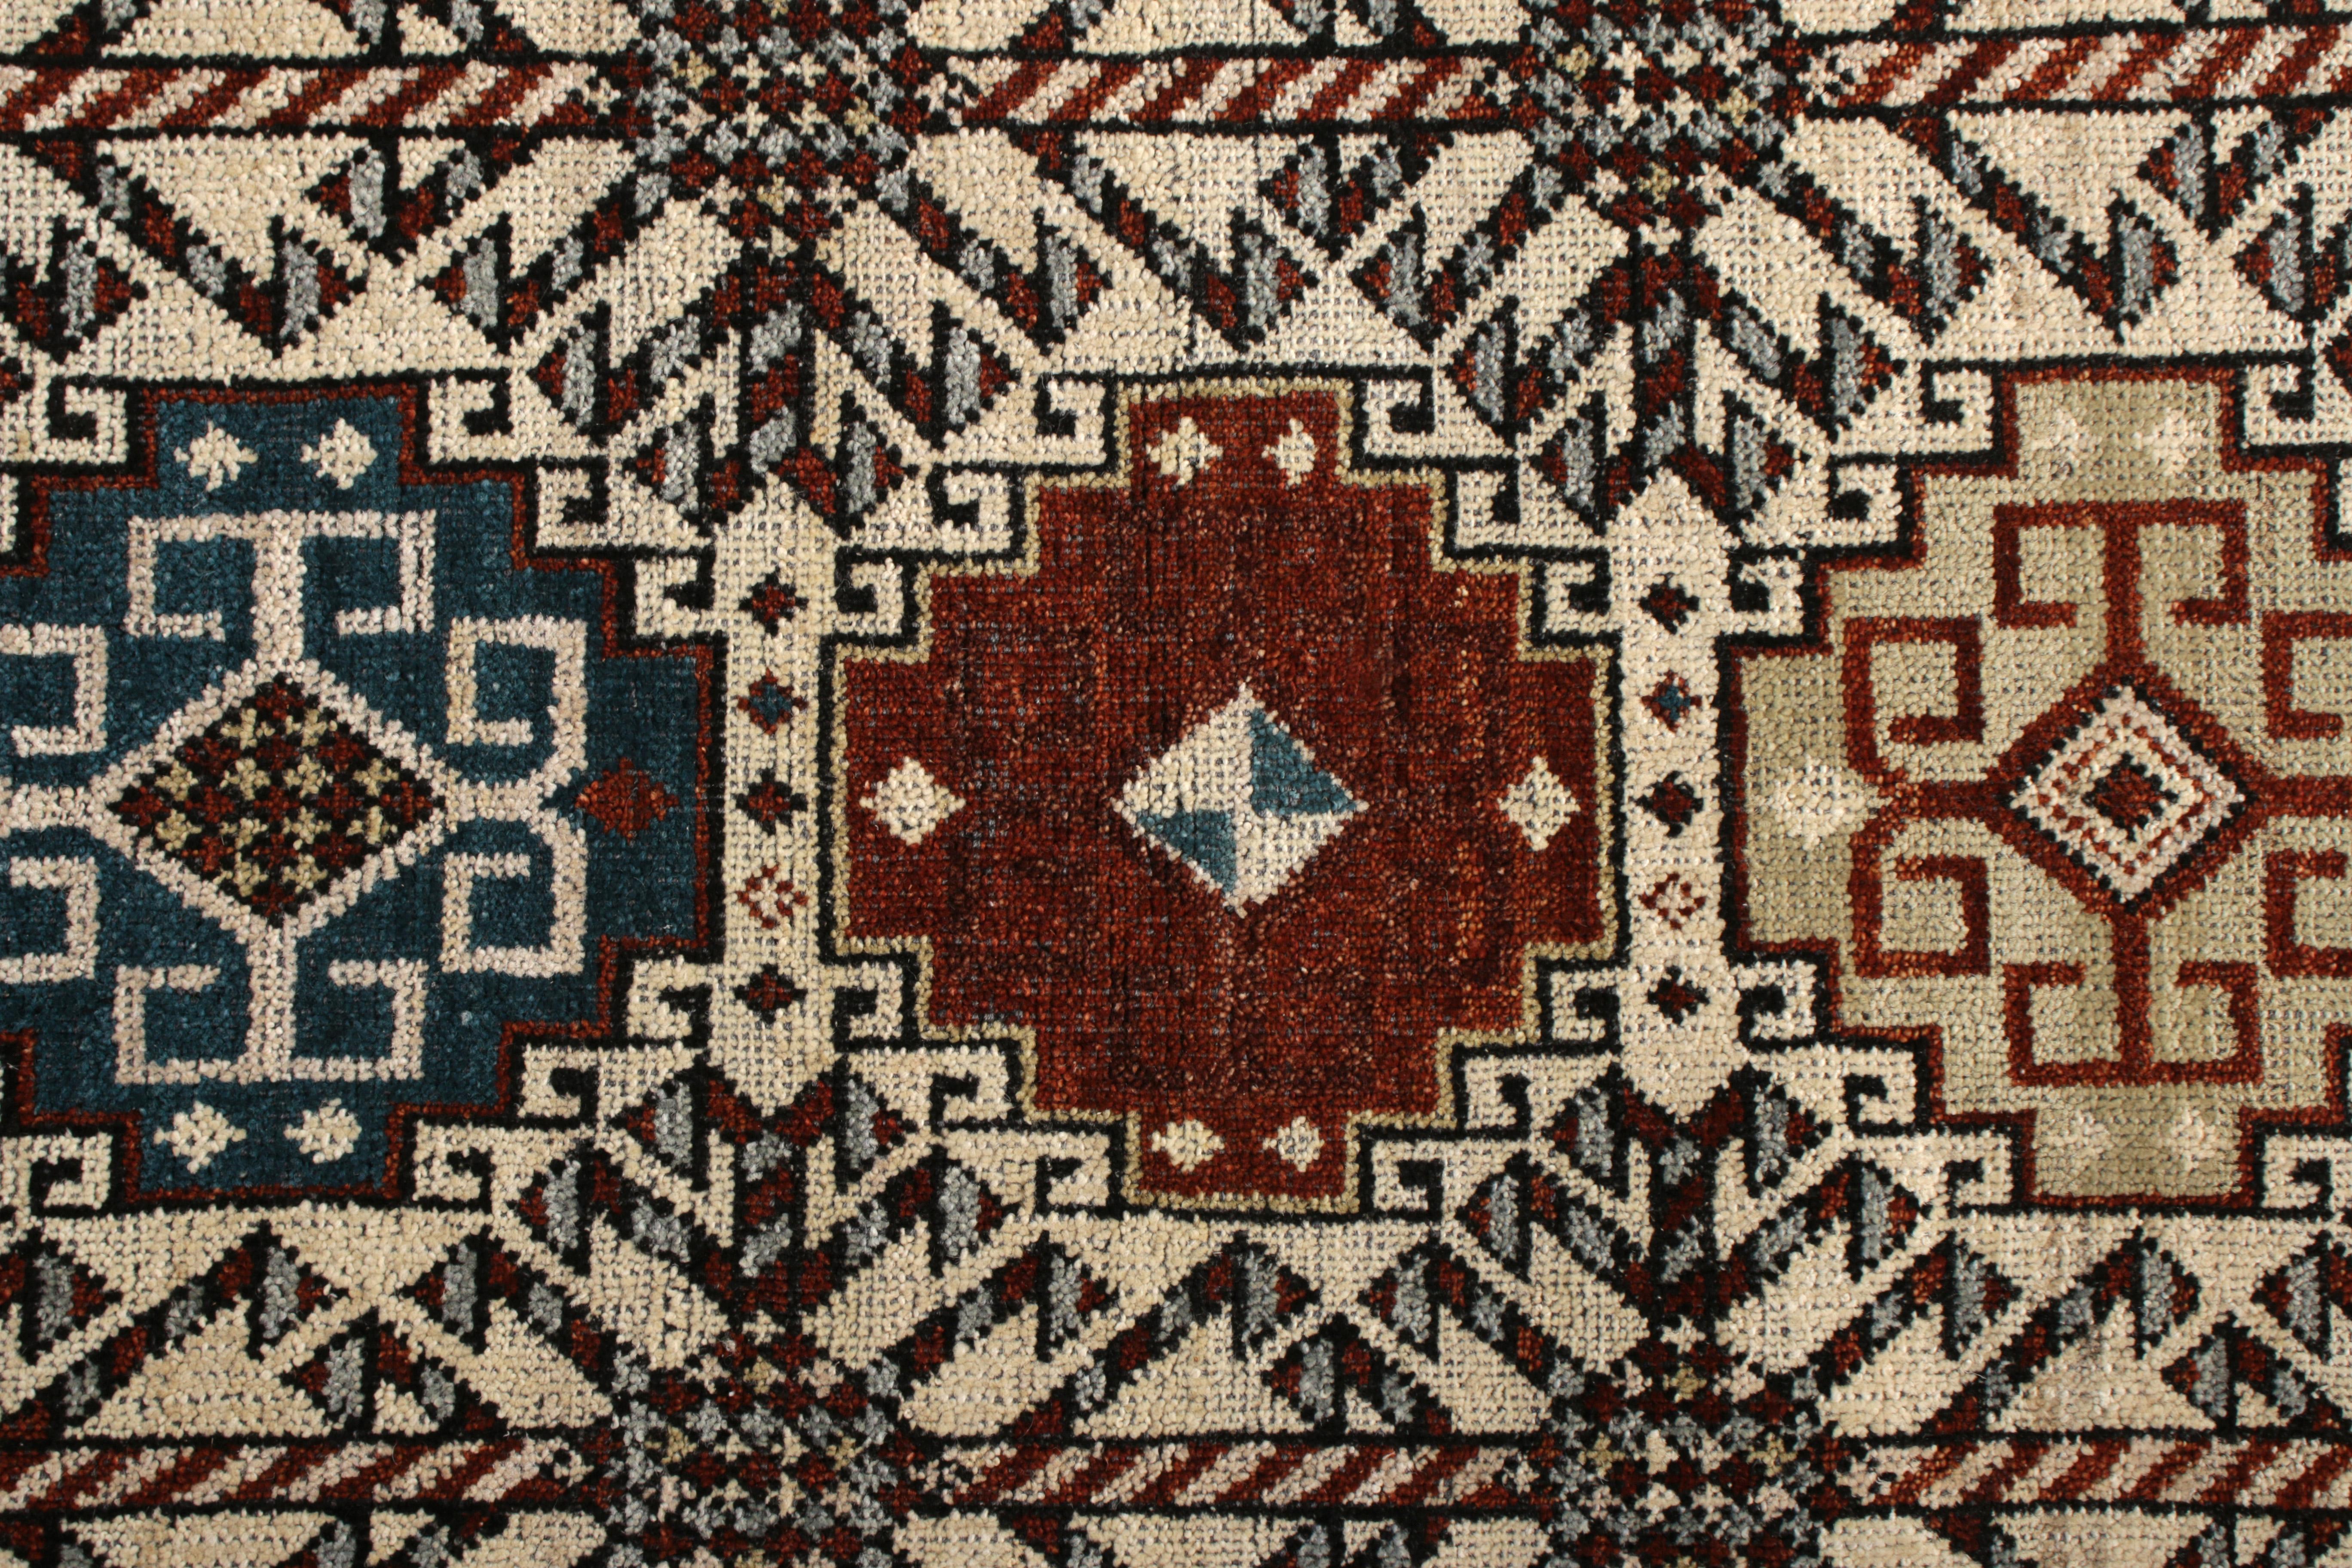 Indian Rug & Kilim's Hand Knotted Qashqai Style Rug in Beige Red Geometric Pattern